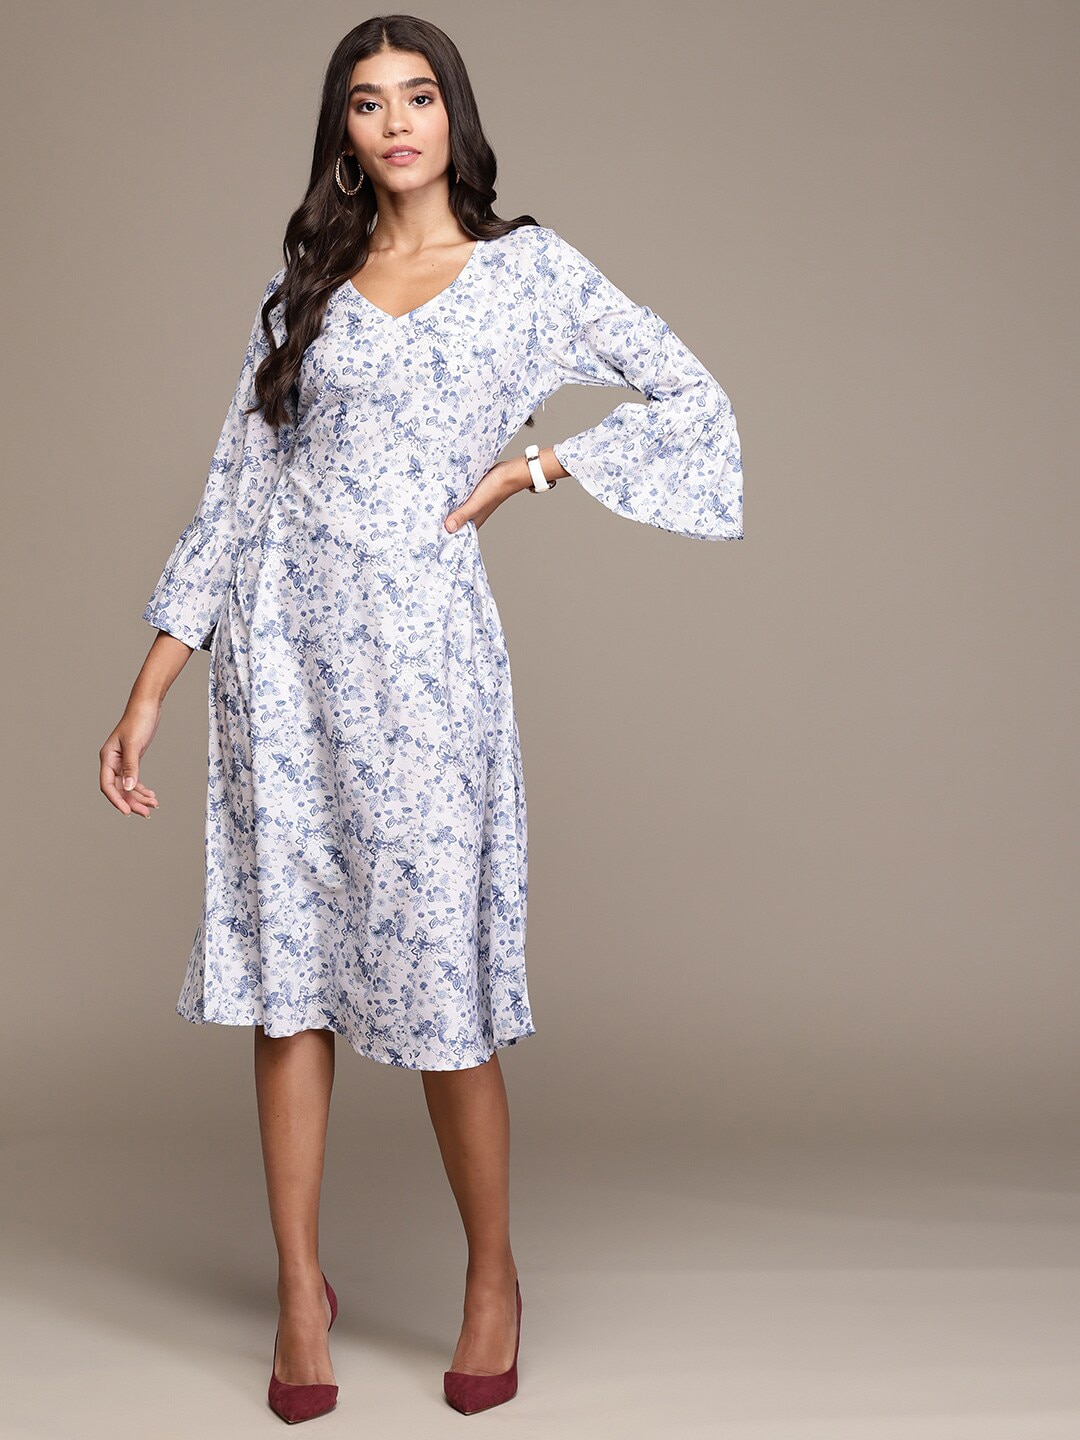 ZIYAA Floral Crepe Dress Price in India